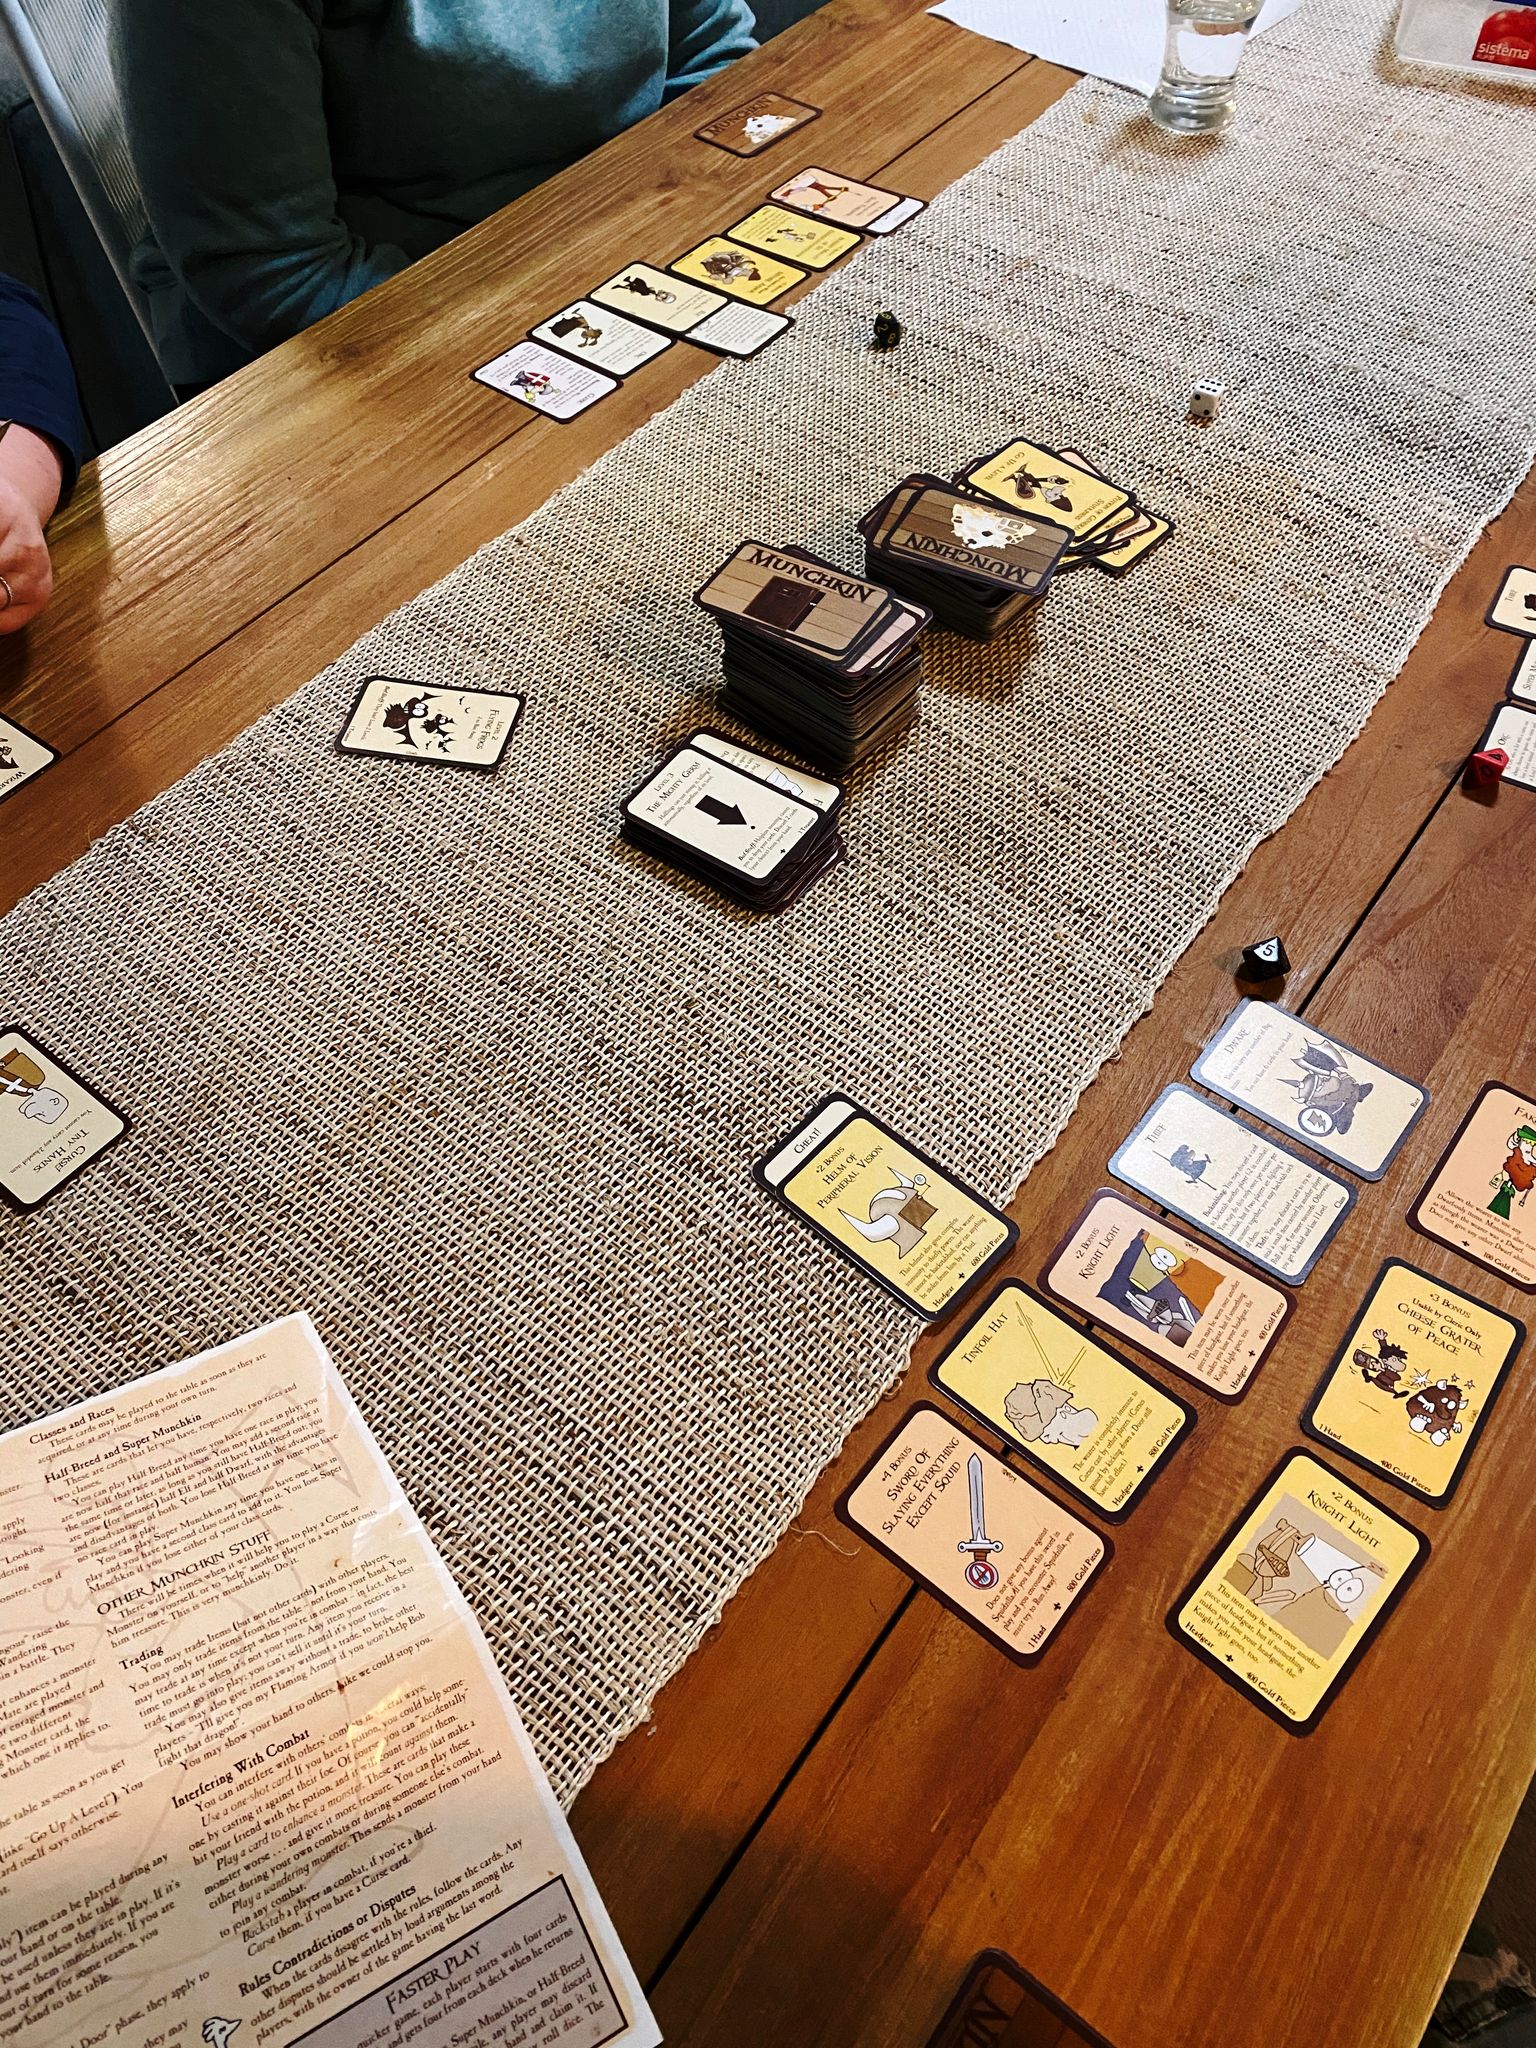 A photo of the card game Munchkin in progress on a table.